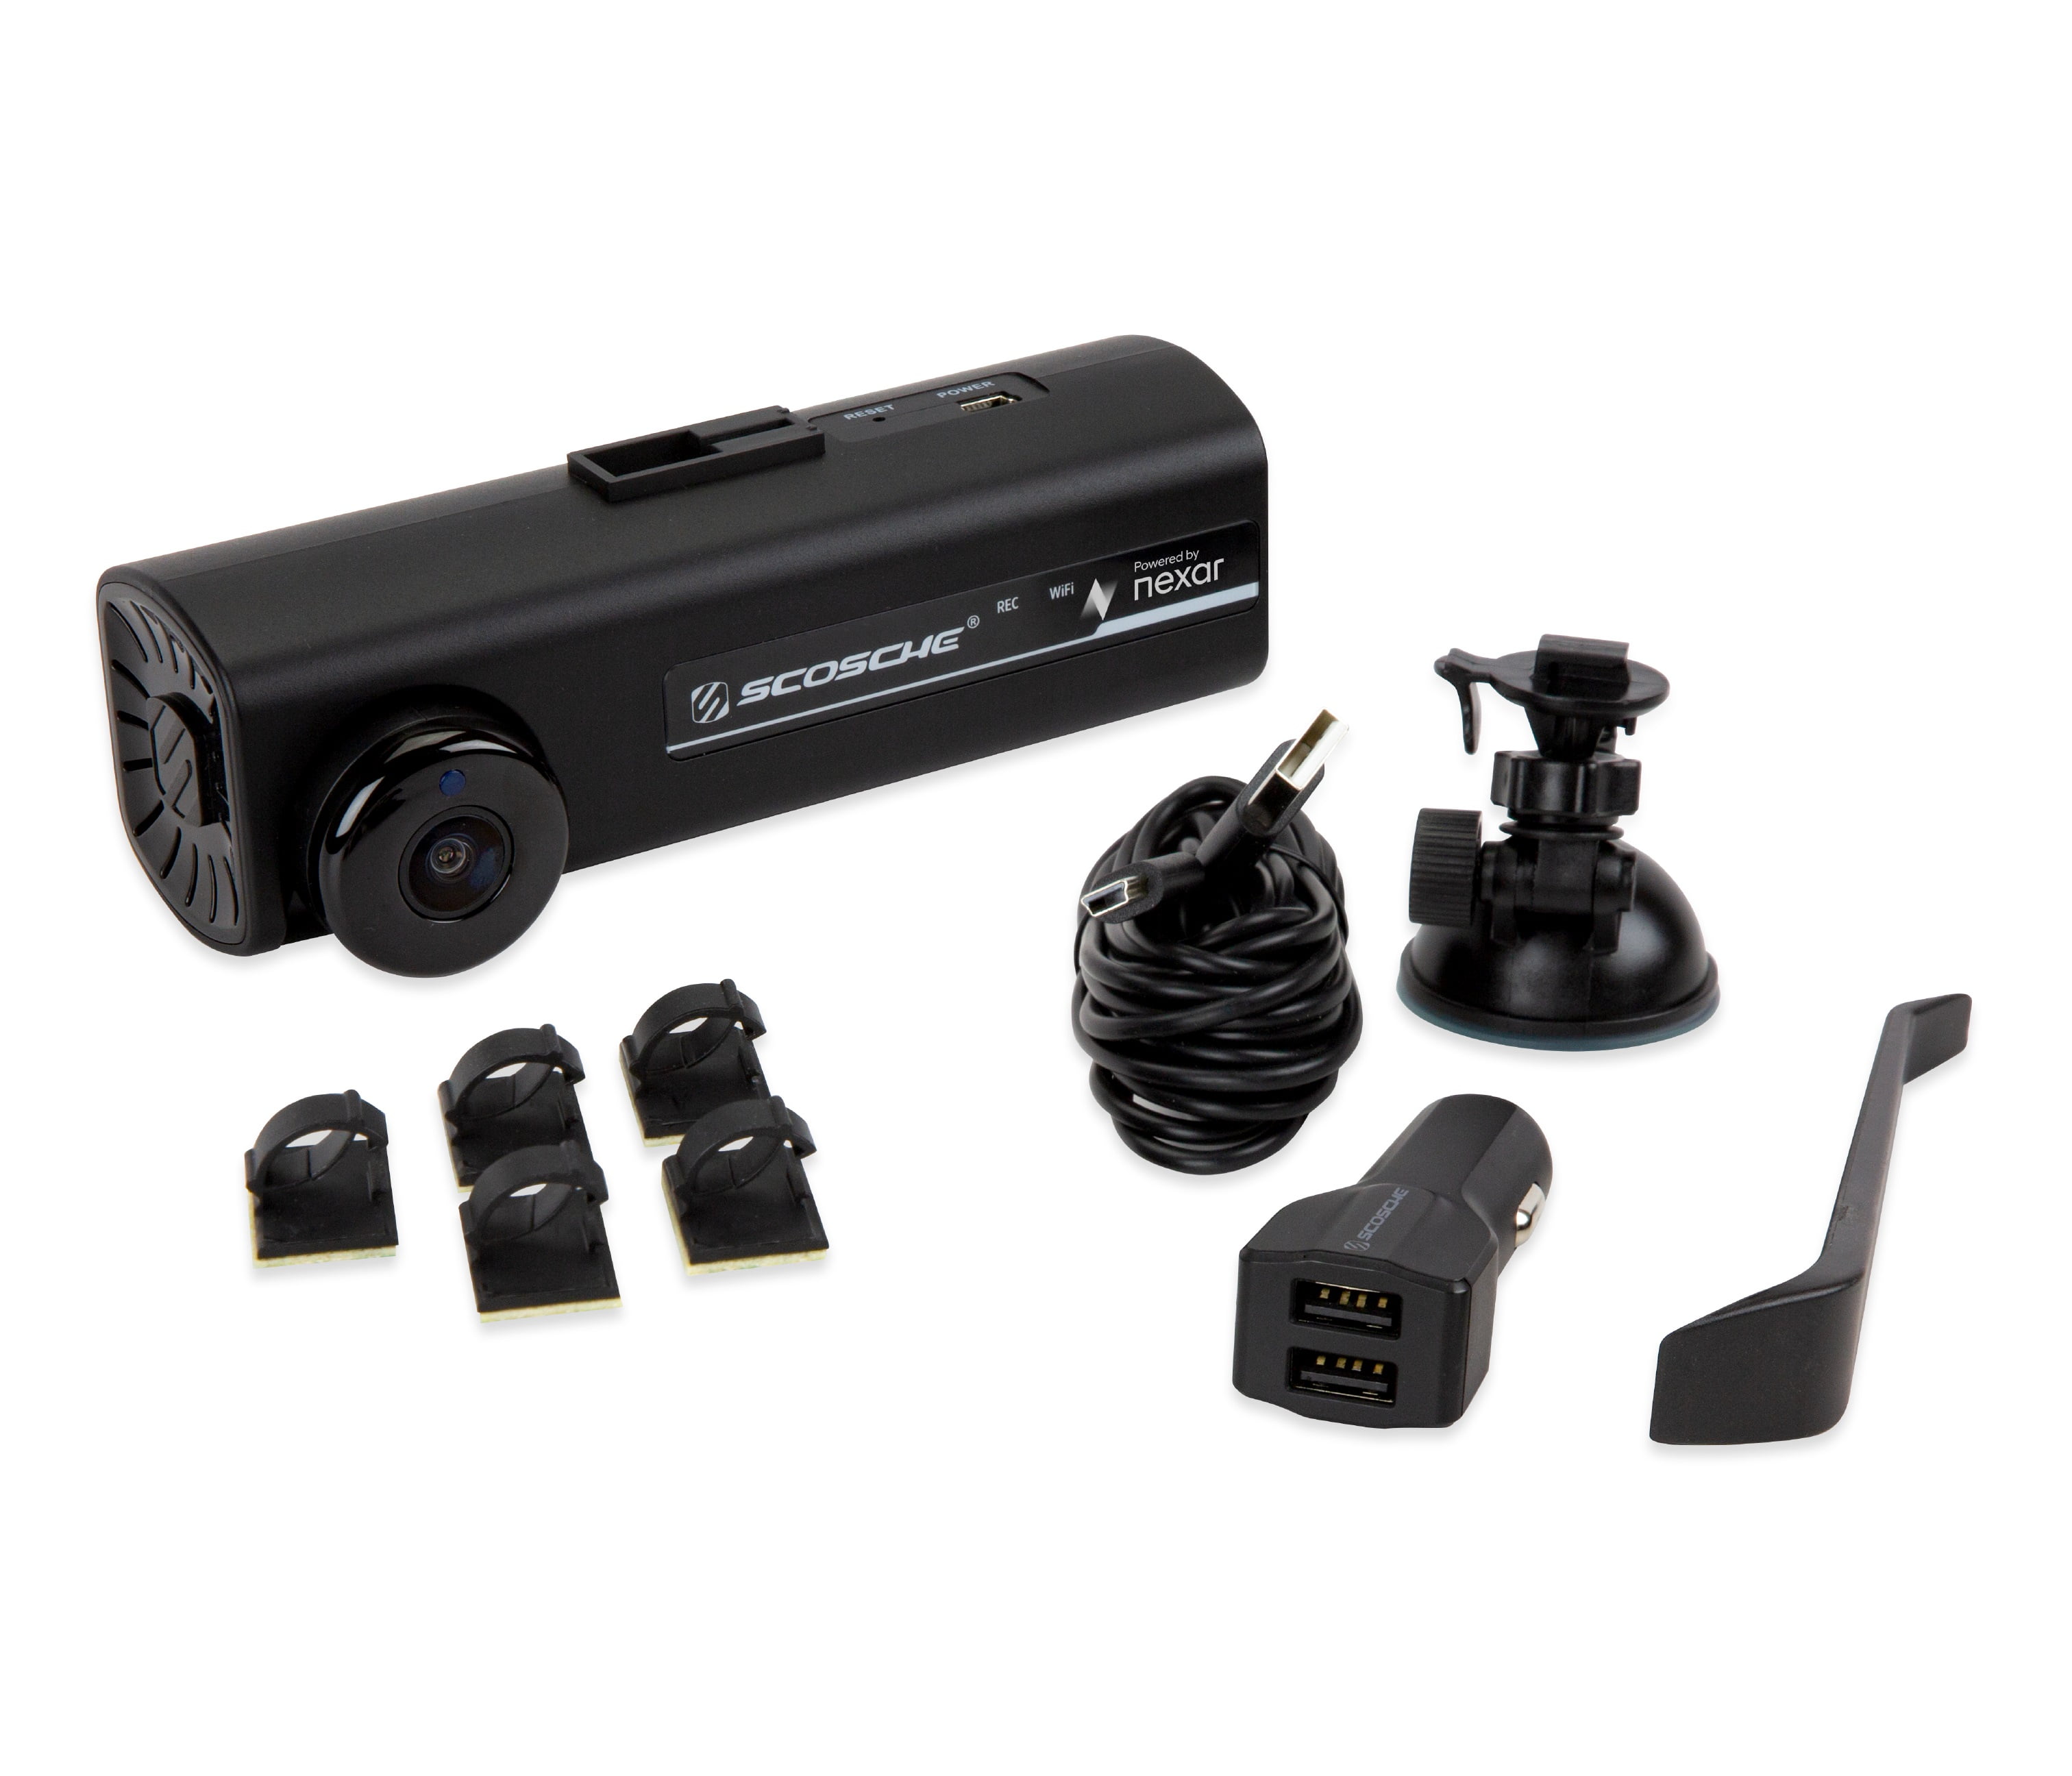 Scosche announces smart dash cam that saves your commute in the